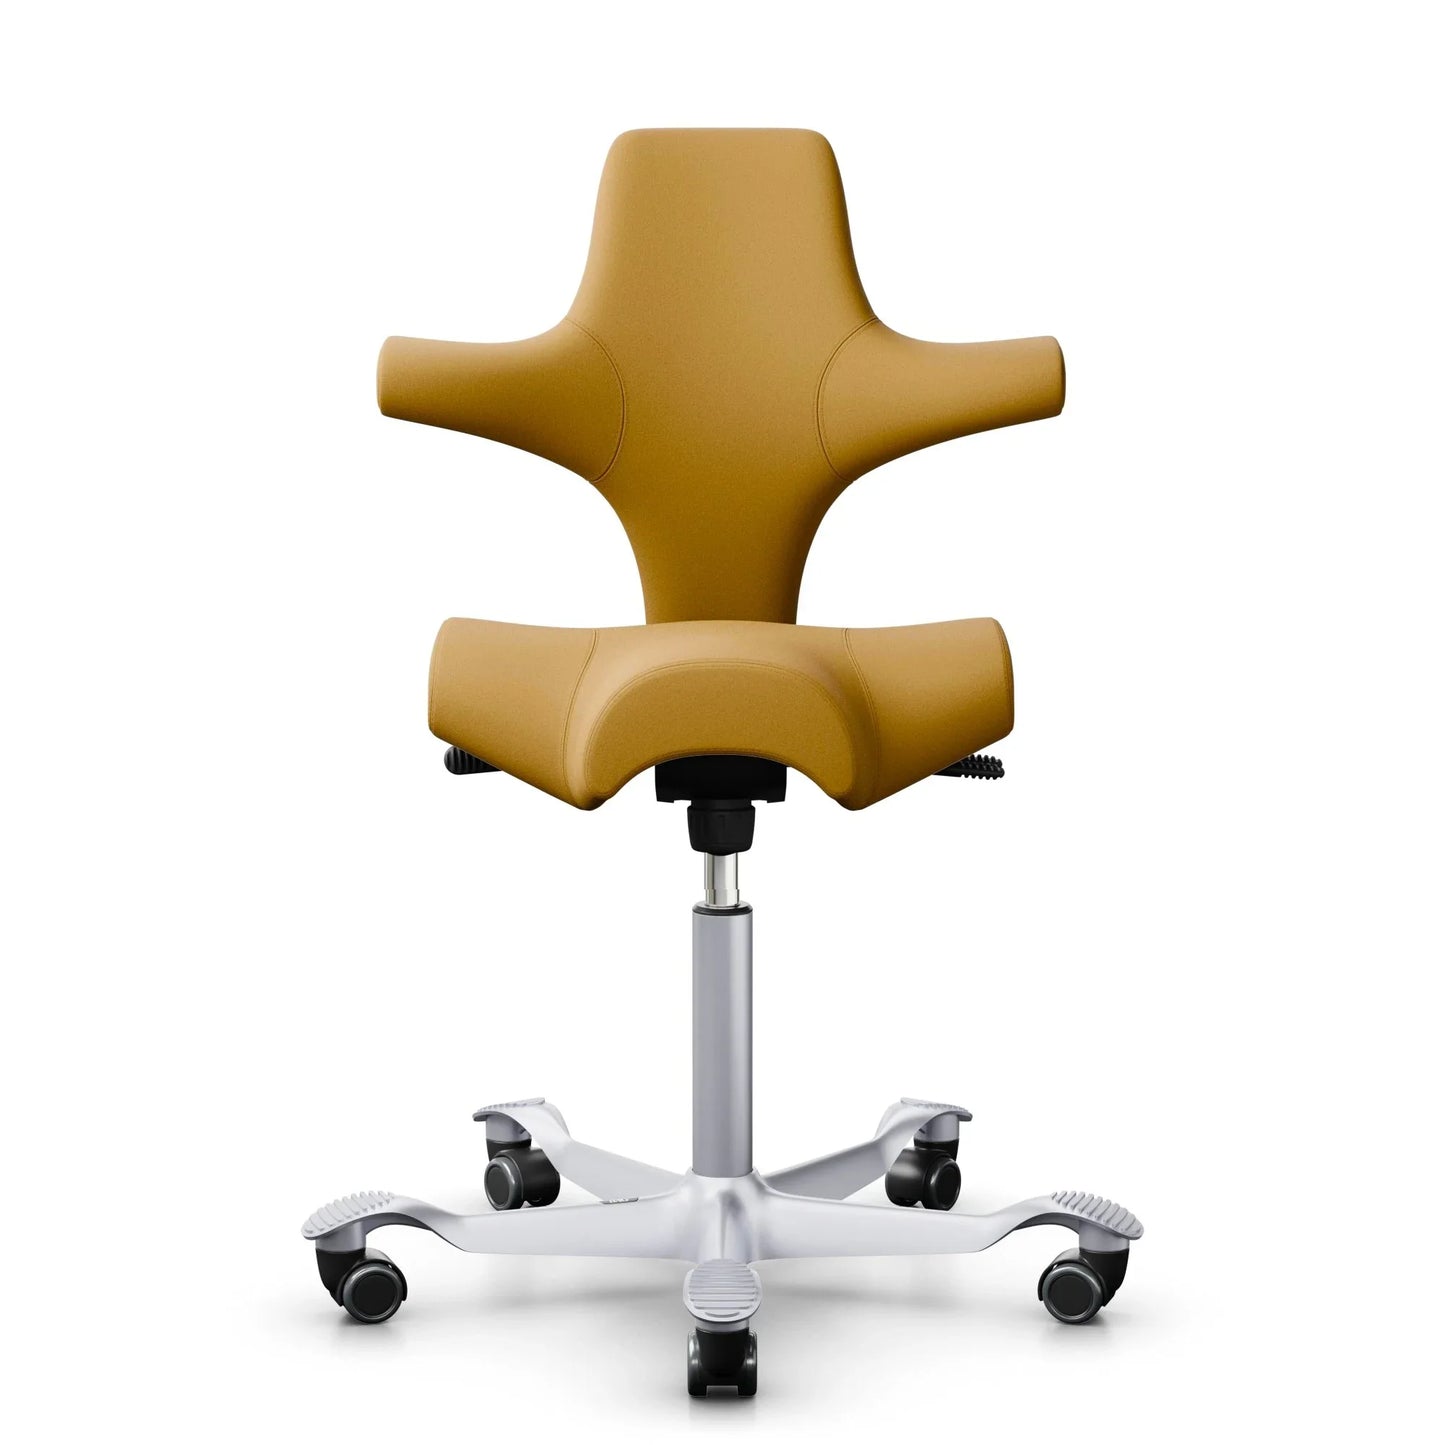 HAG Capisco Saddle Chair w/ Medical Grade Covering